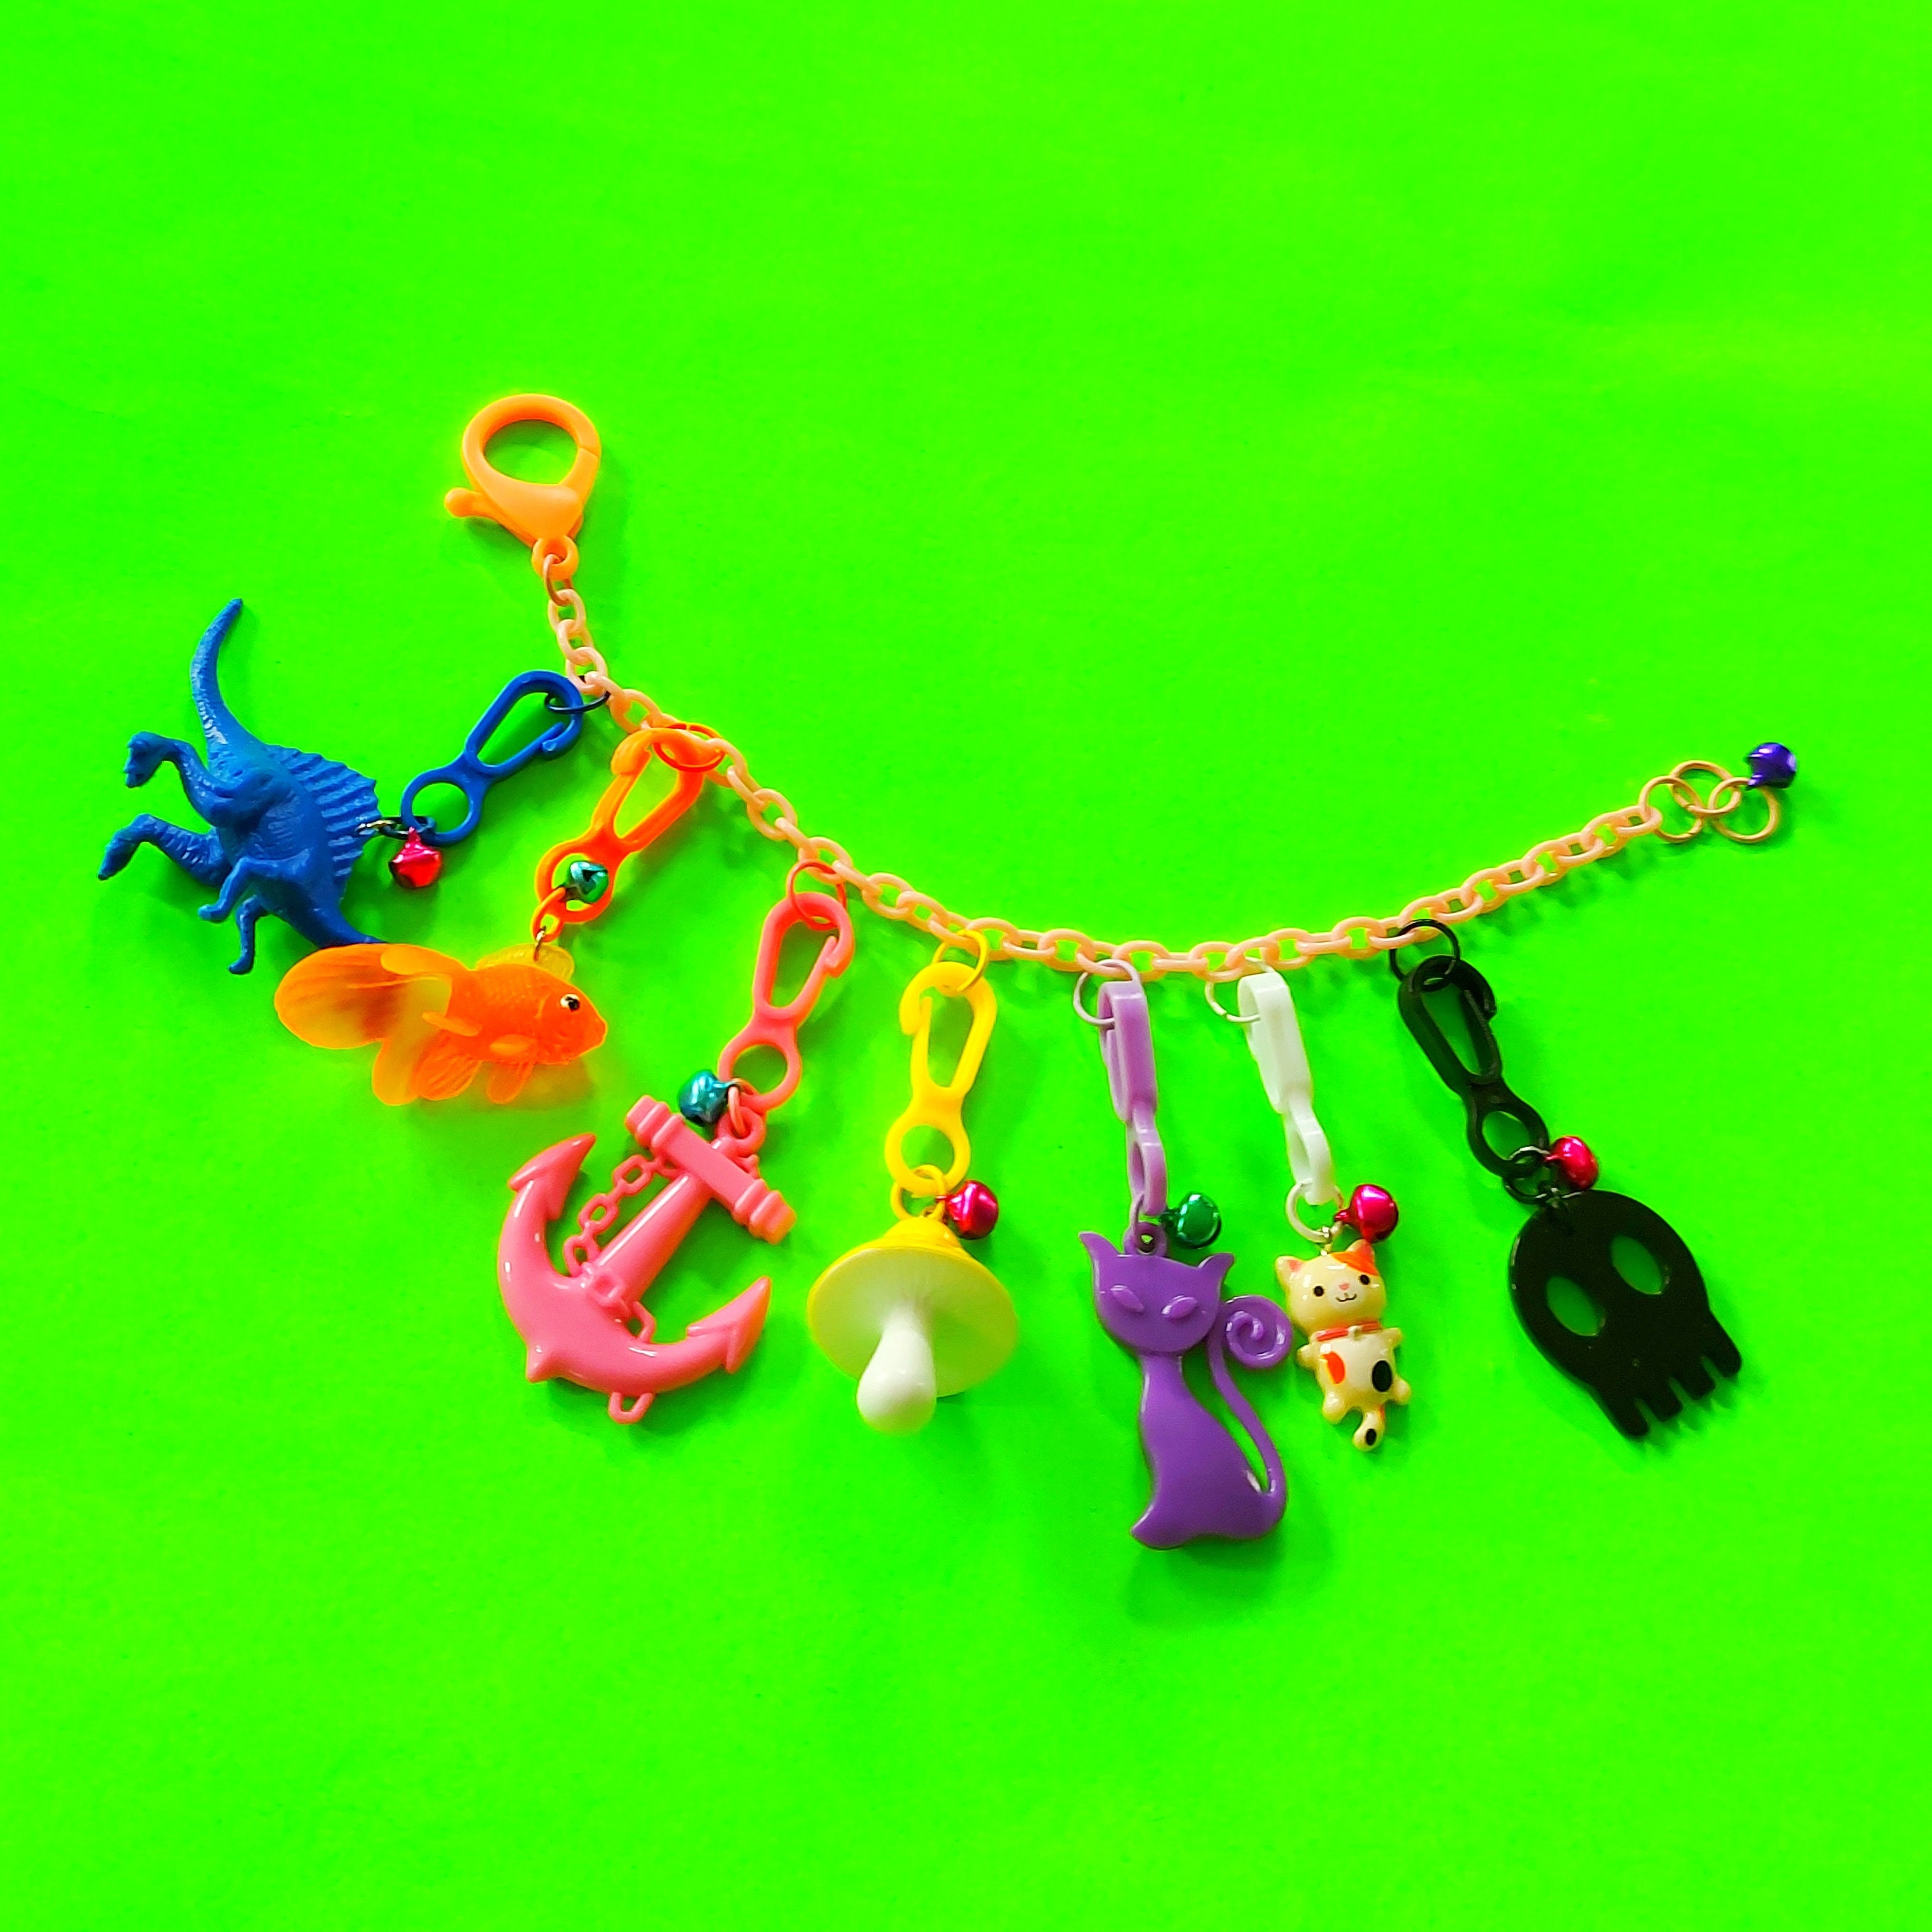 Vintage 80s Plastic Charm Necklace with 12 Charms. | #1833429367 | 80's  toys, Kids memories, Childhood memories